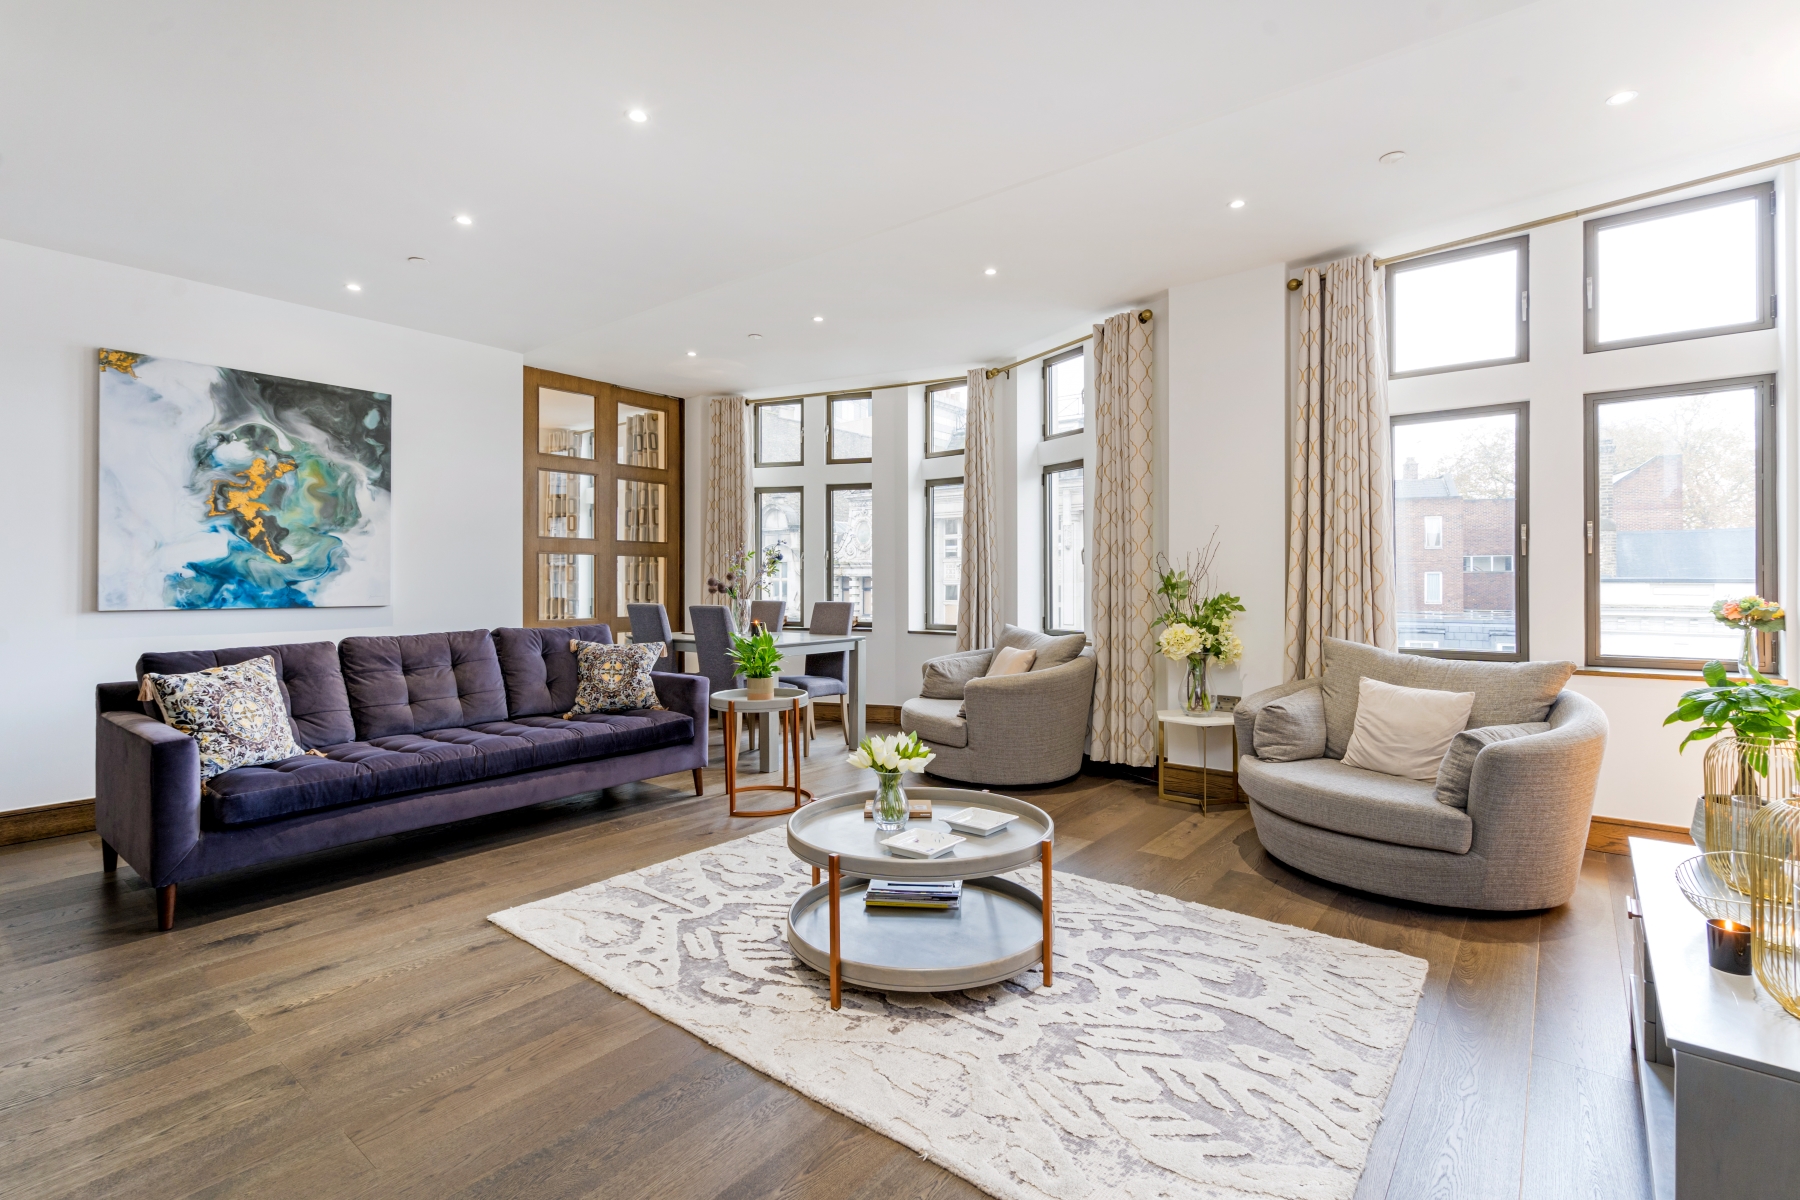 A thoughtfully designed oasis in the heart of the city